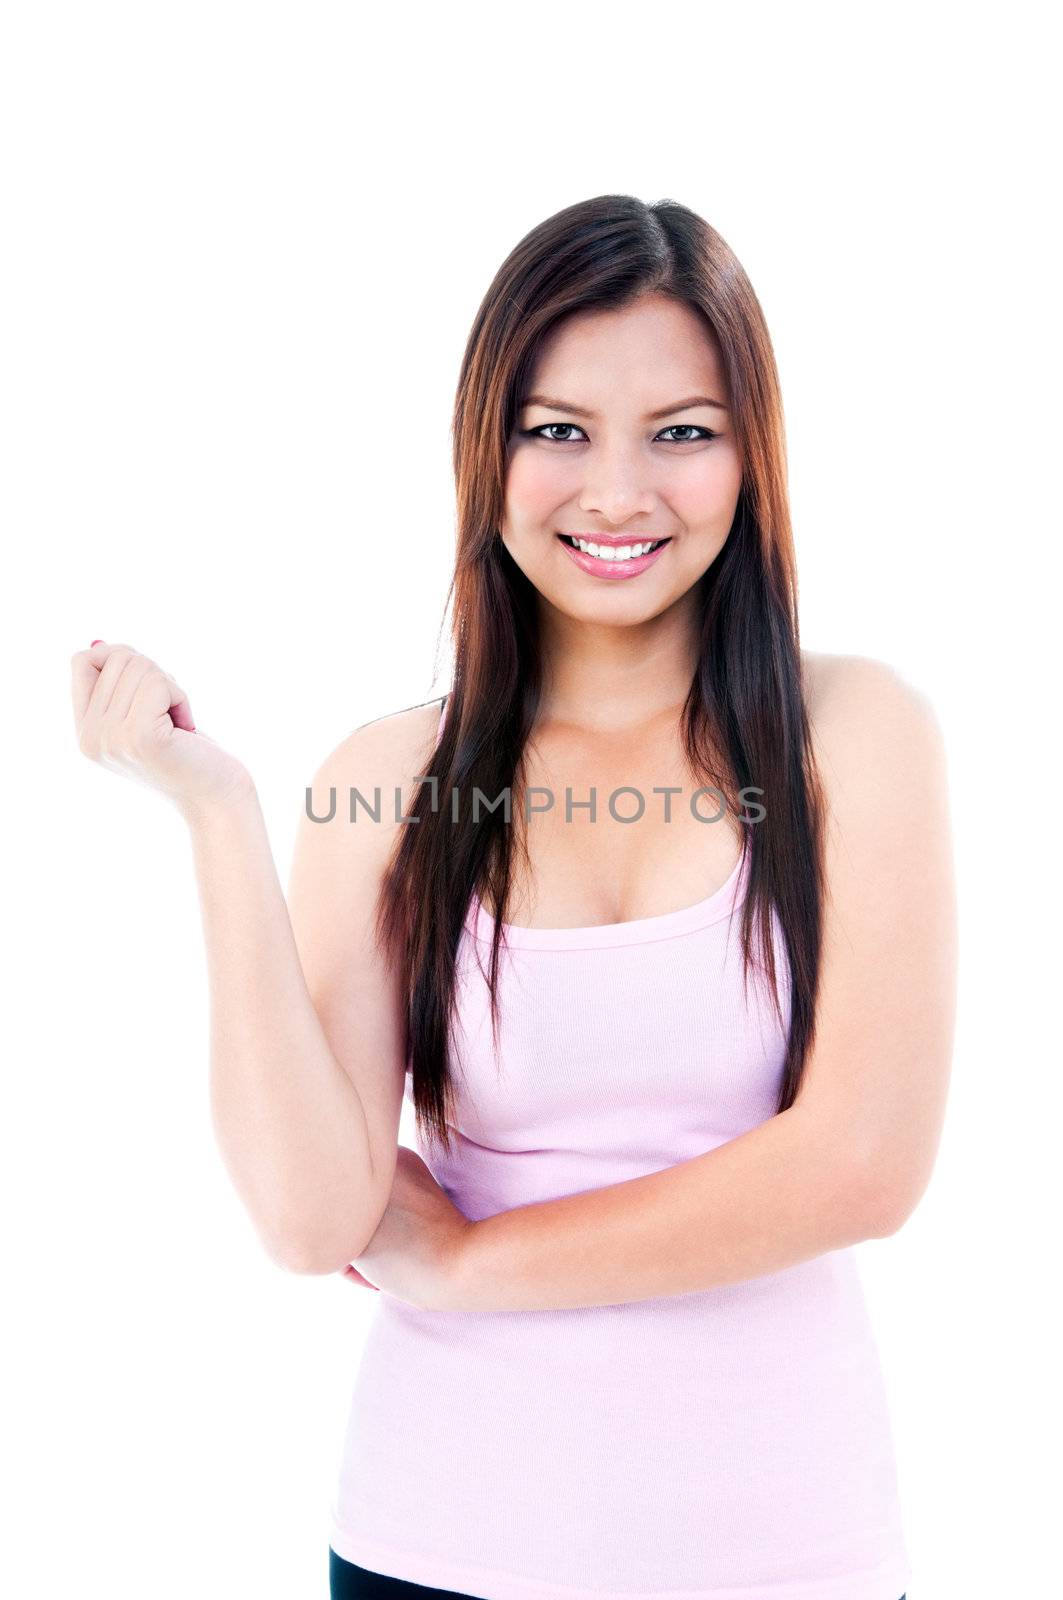 Portrait of beautiful young woman smiling, isolated on white.